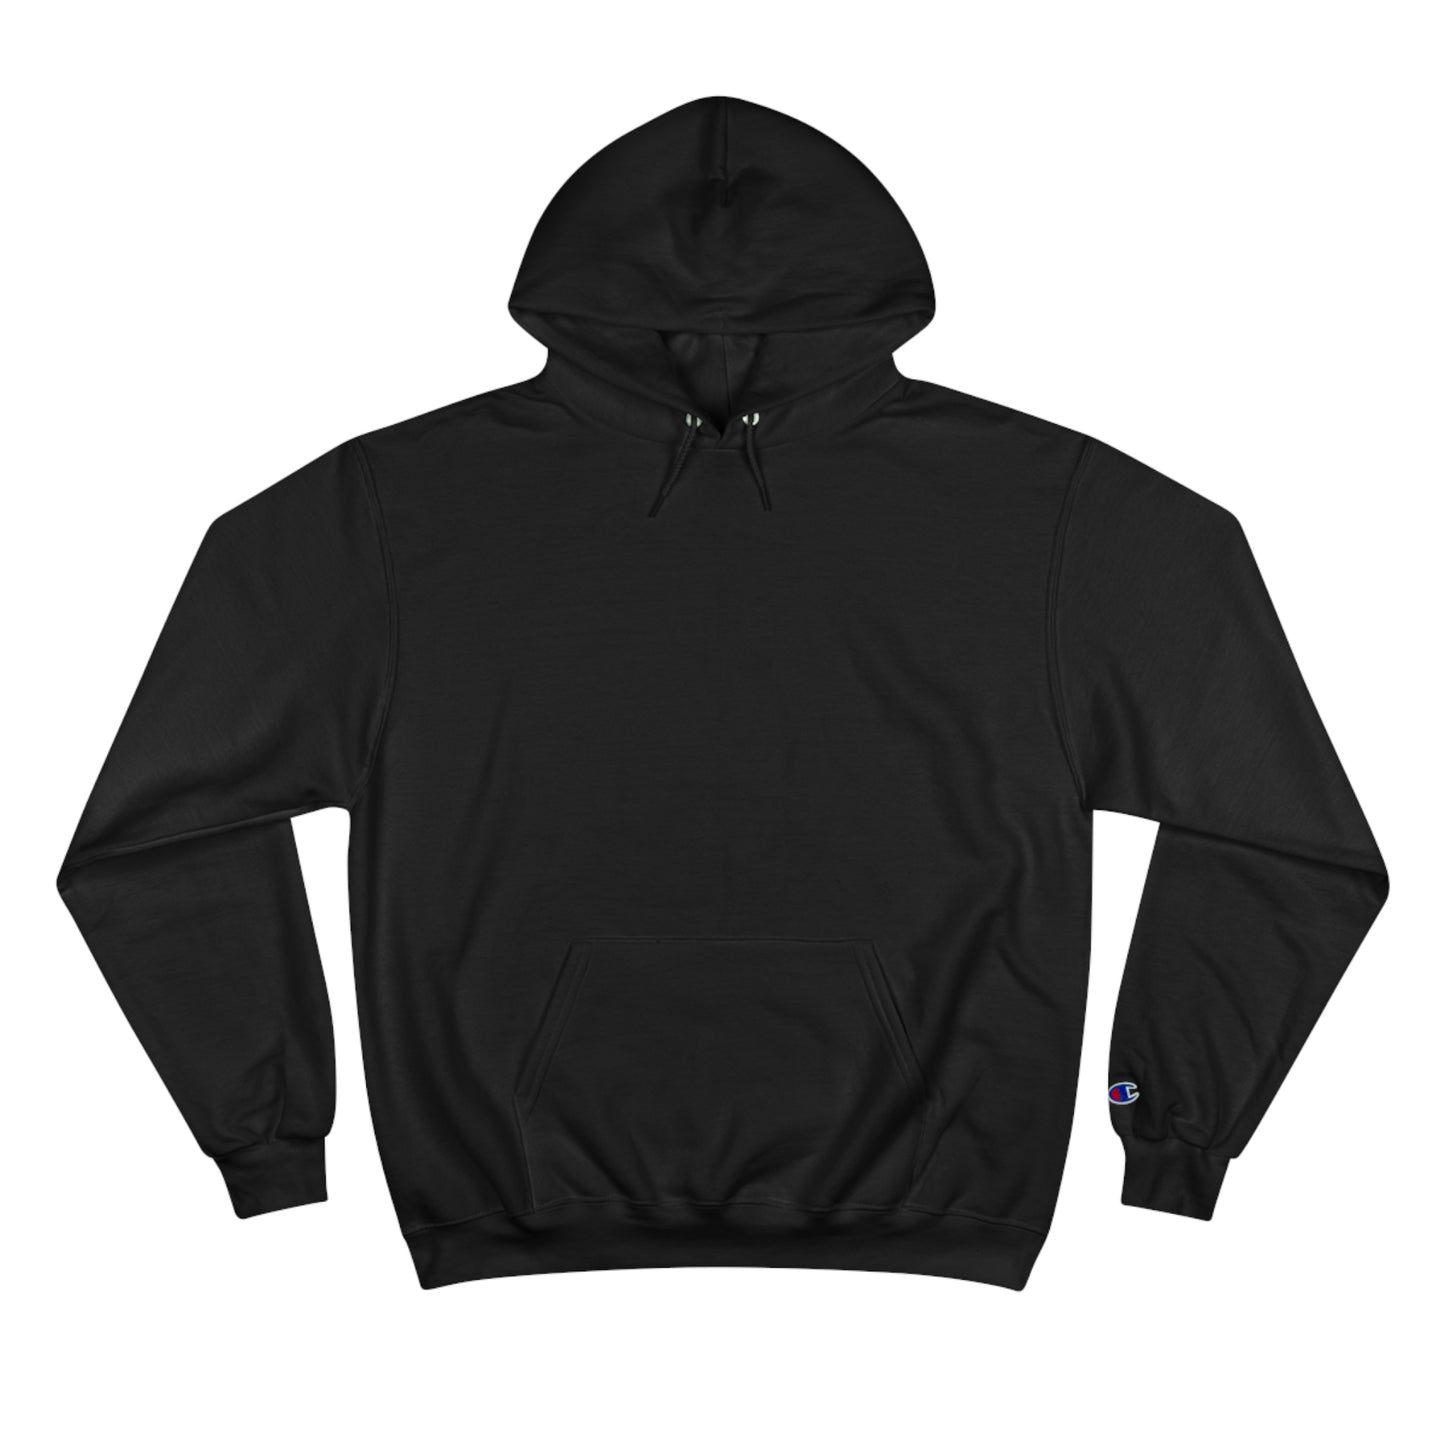 Strength In Unity Champion Hoodie